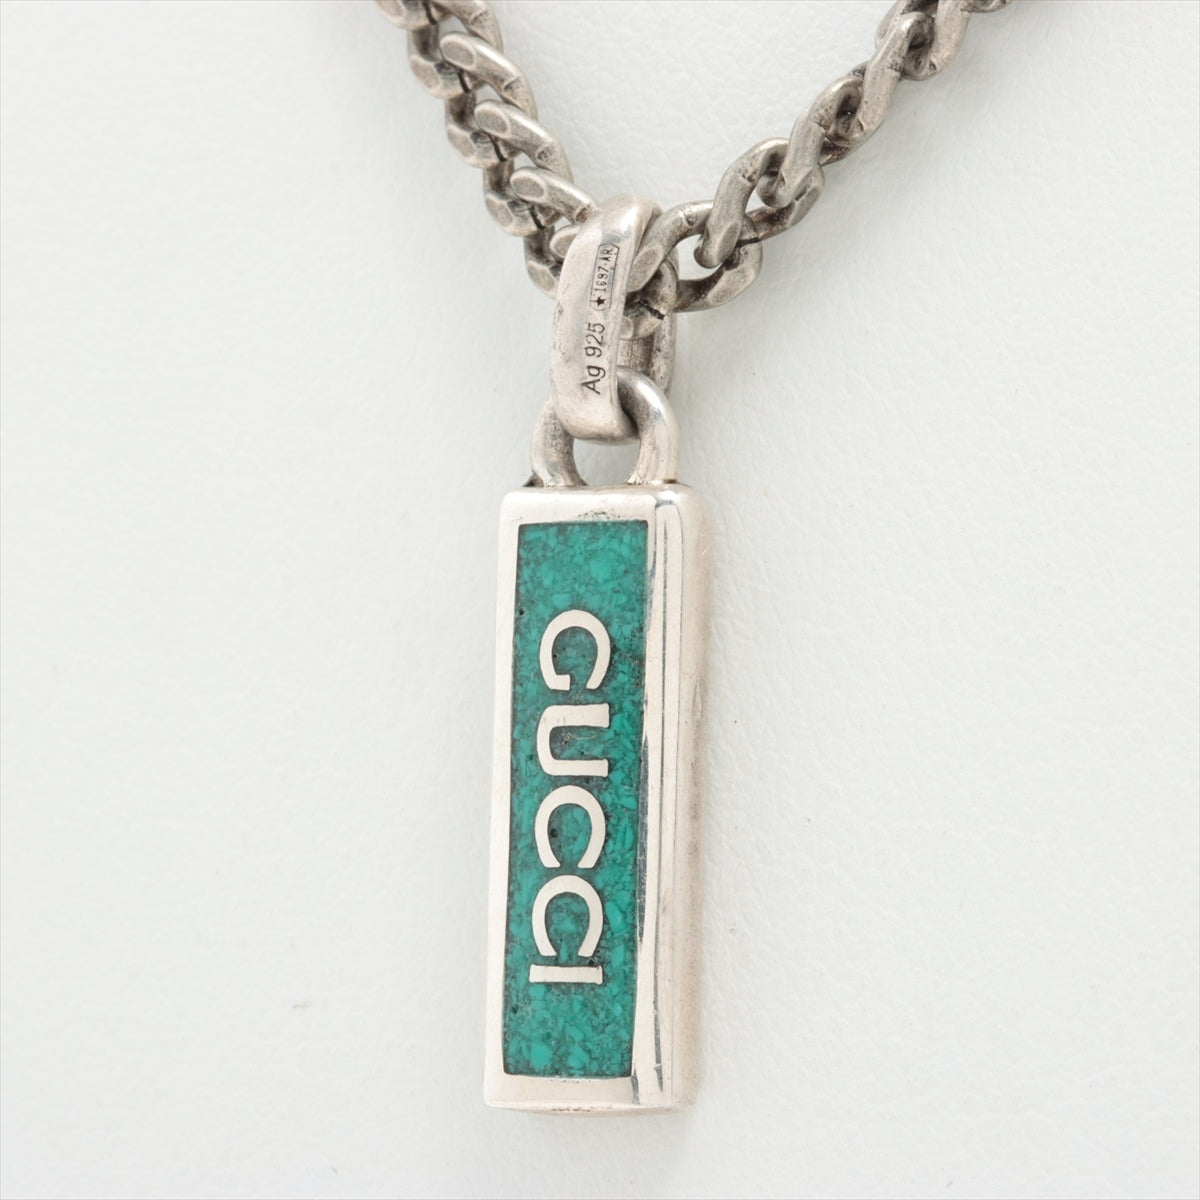 Gucci Necklace 925 20.5g Silver Scratched Discoloration Stained Losing luster 678714